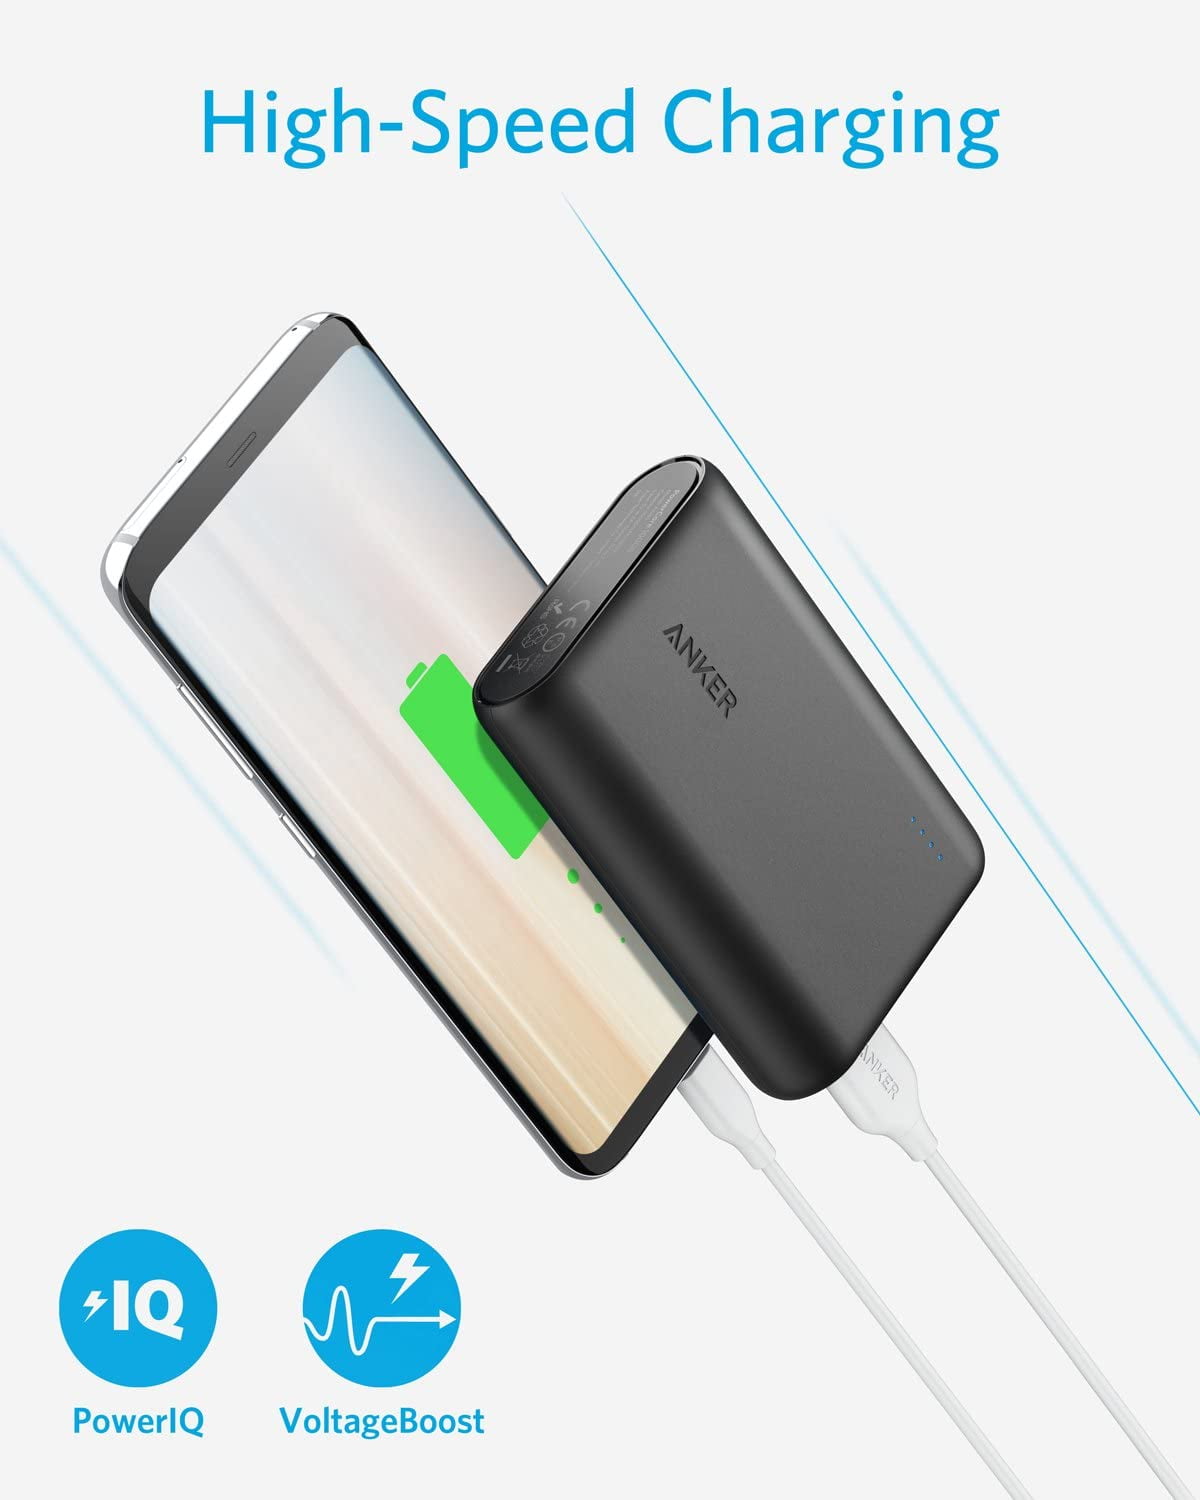 High-Speed Charging Technology Power Bank for iPhone Ultra-Compact Anker PowerCore 10000 One of The Smallest and Lightest 10000mAh External Batteries Samsung Galaxy and More 